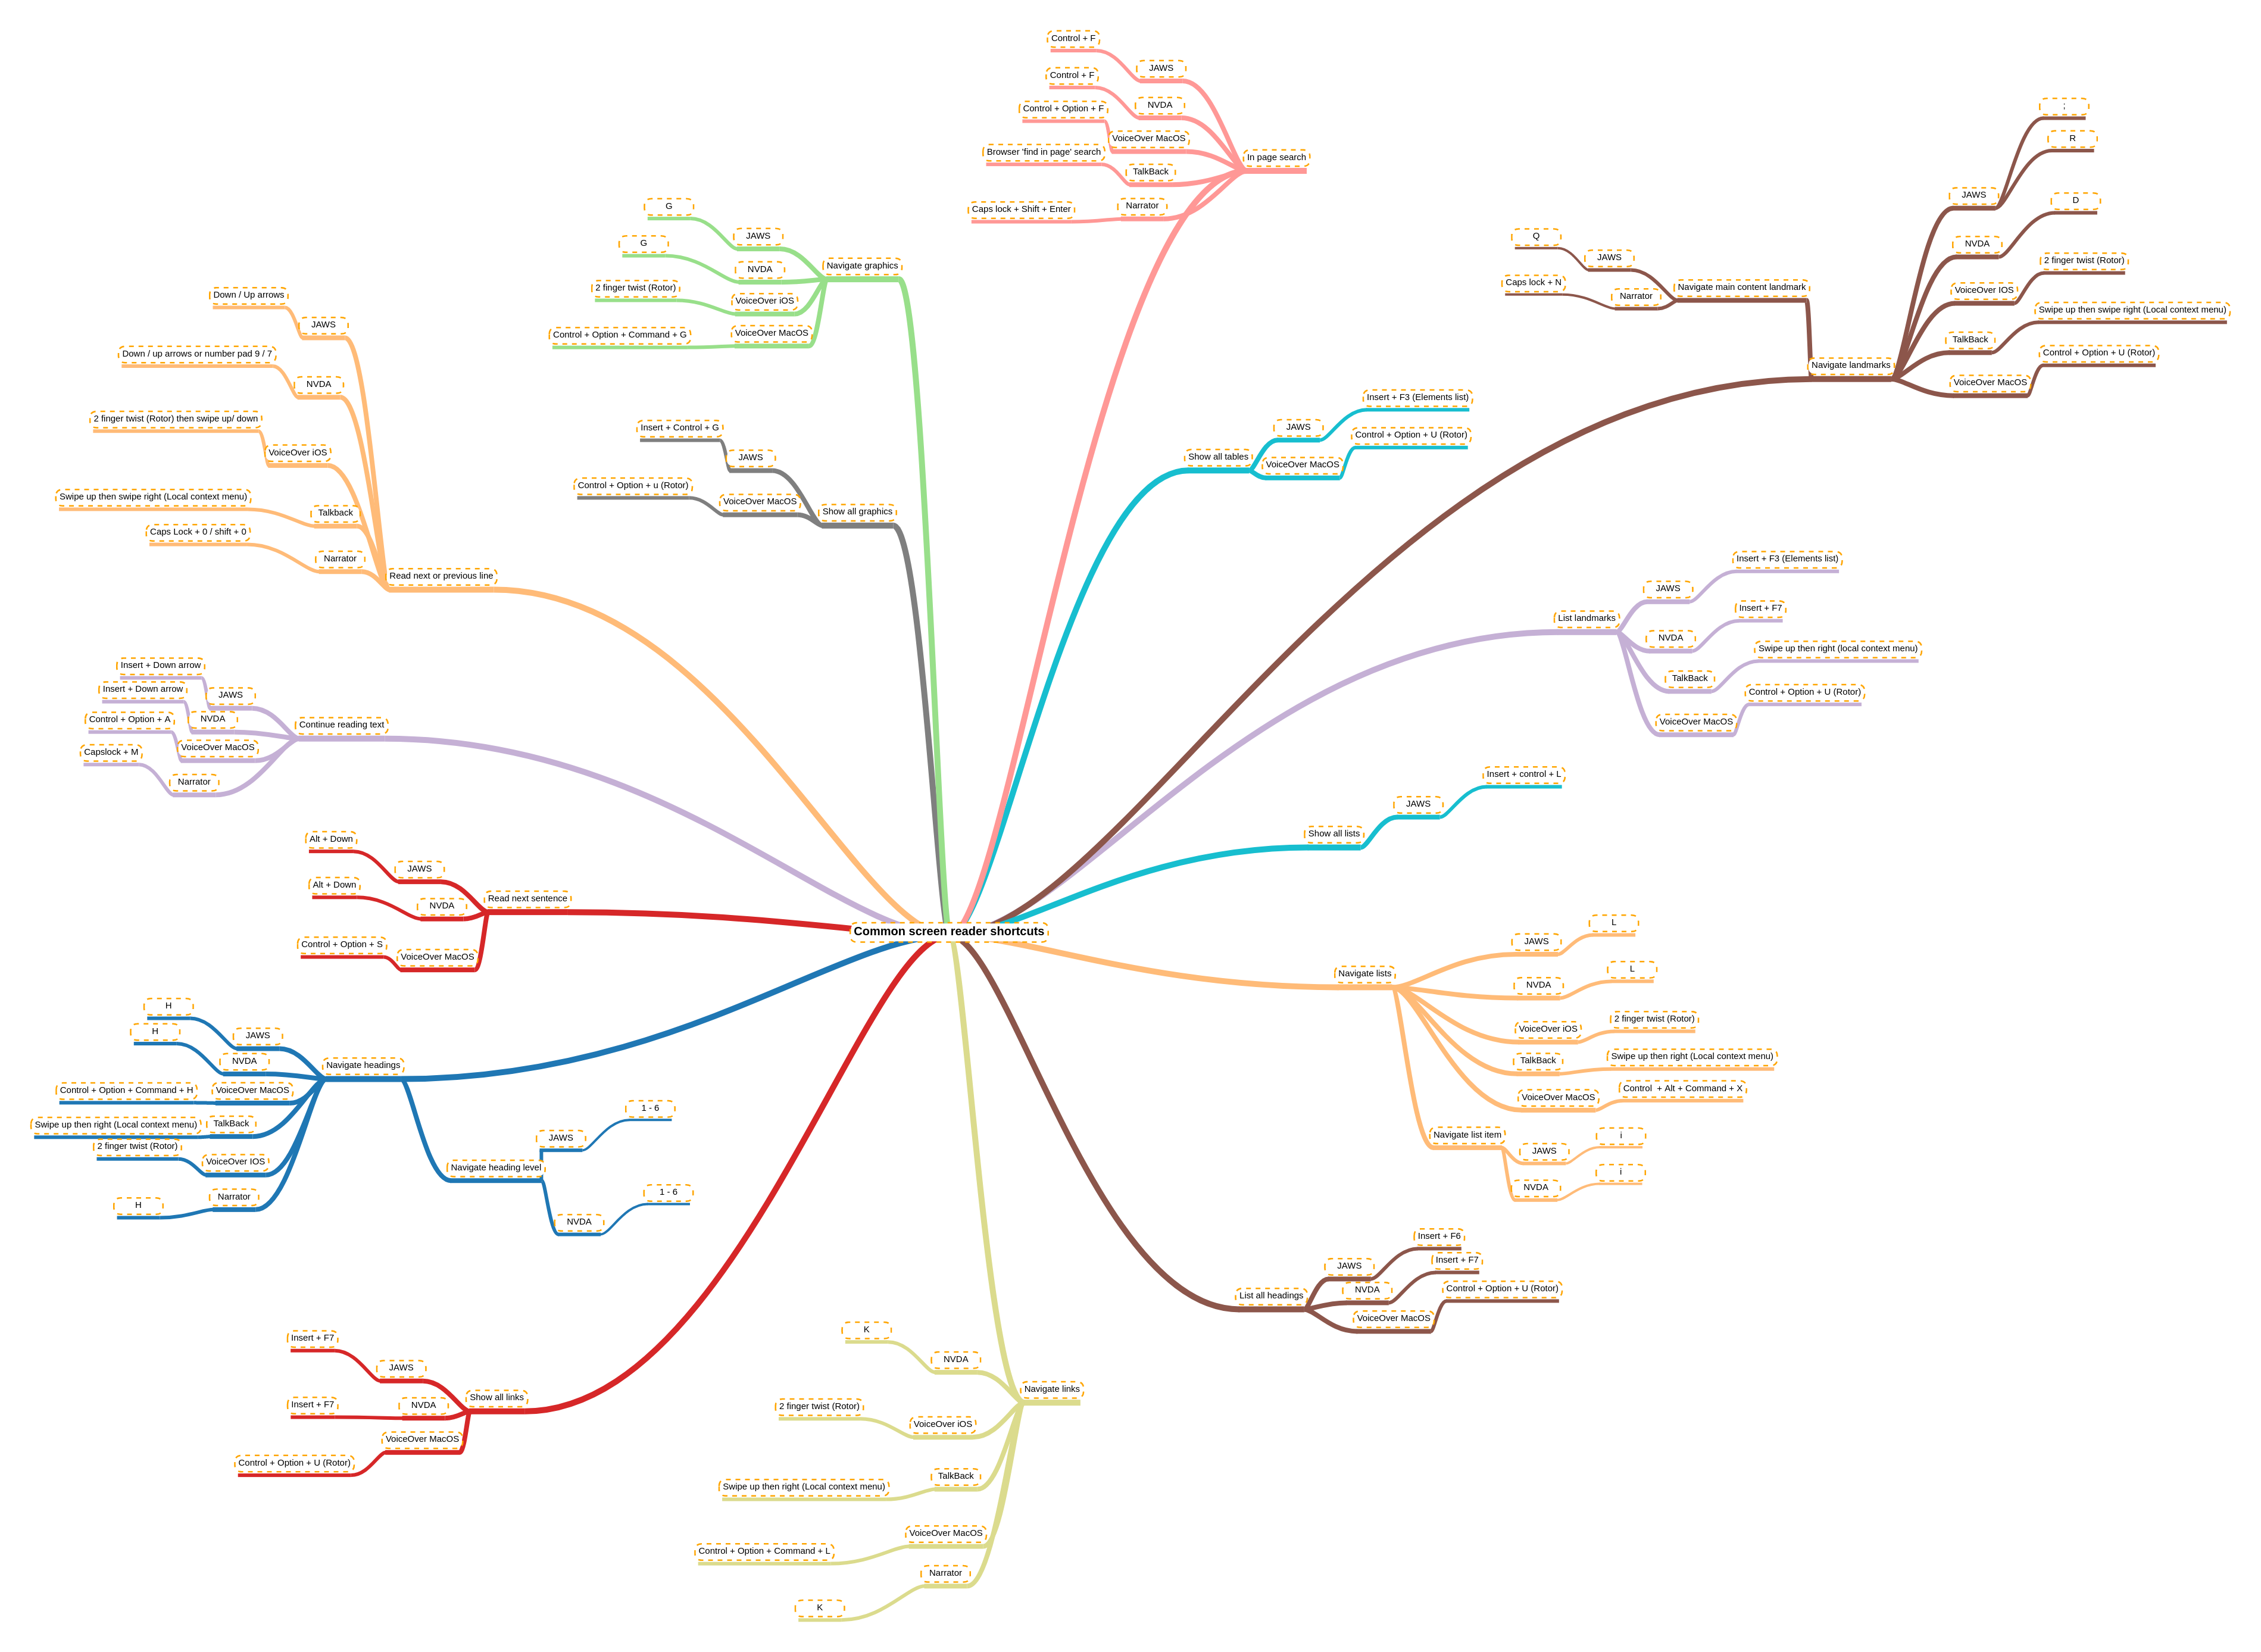 A mind map of common screen reader commands, such as quick keys to navigate by elements, keys for reading content, and reviewing listings of certain elements.